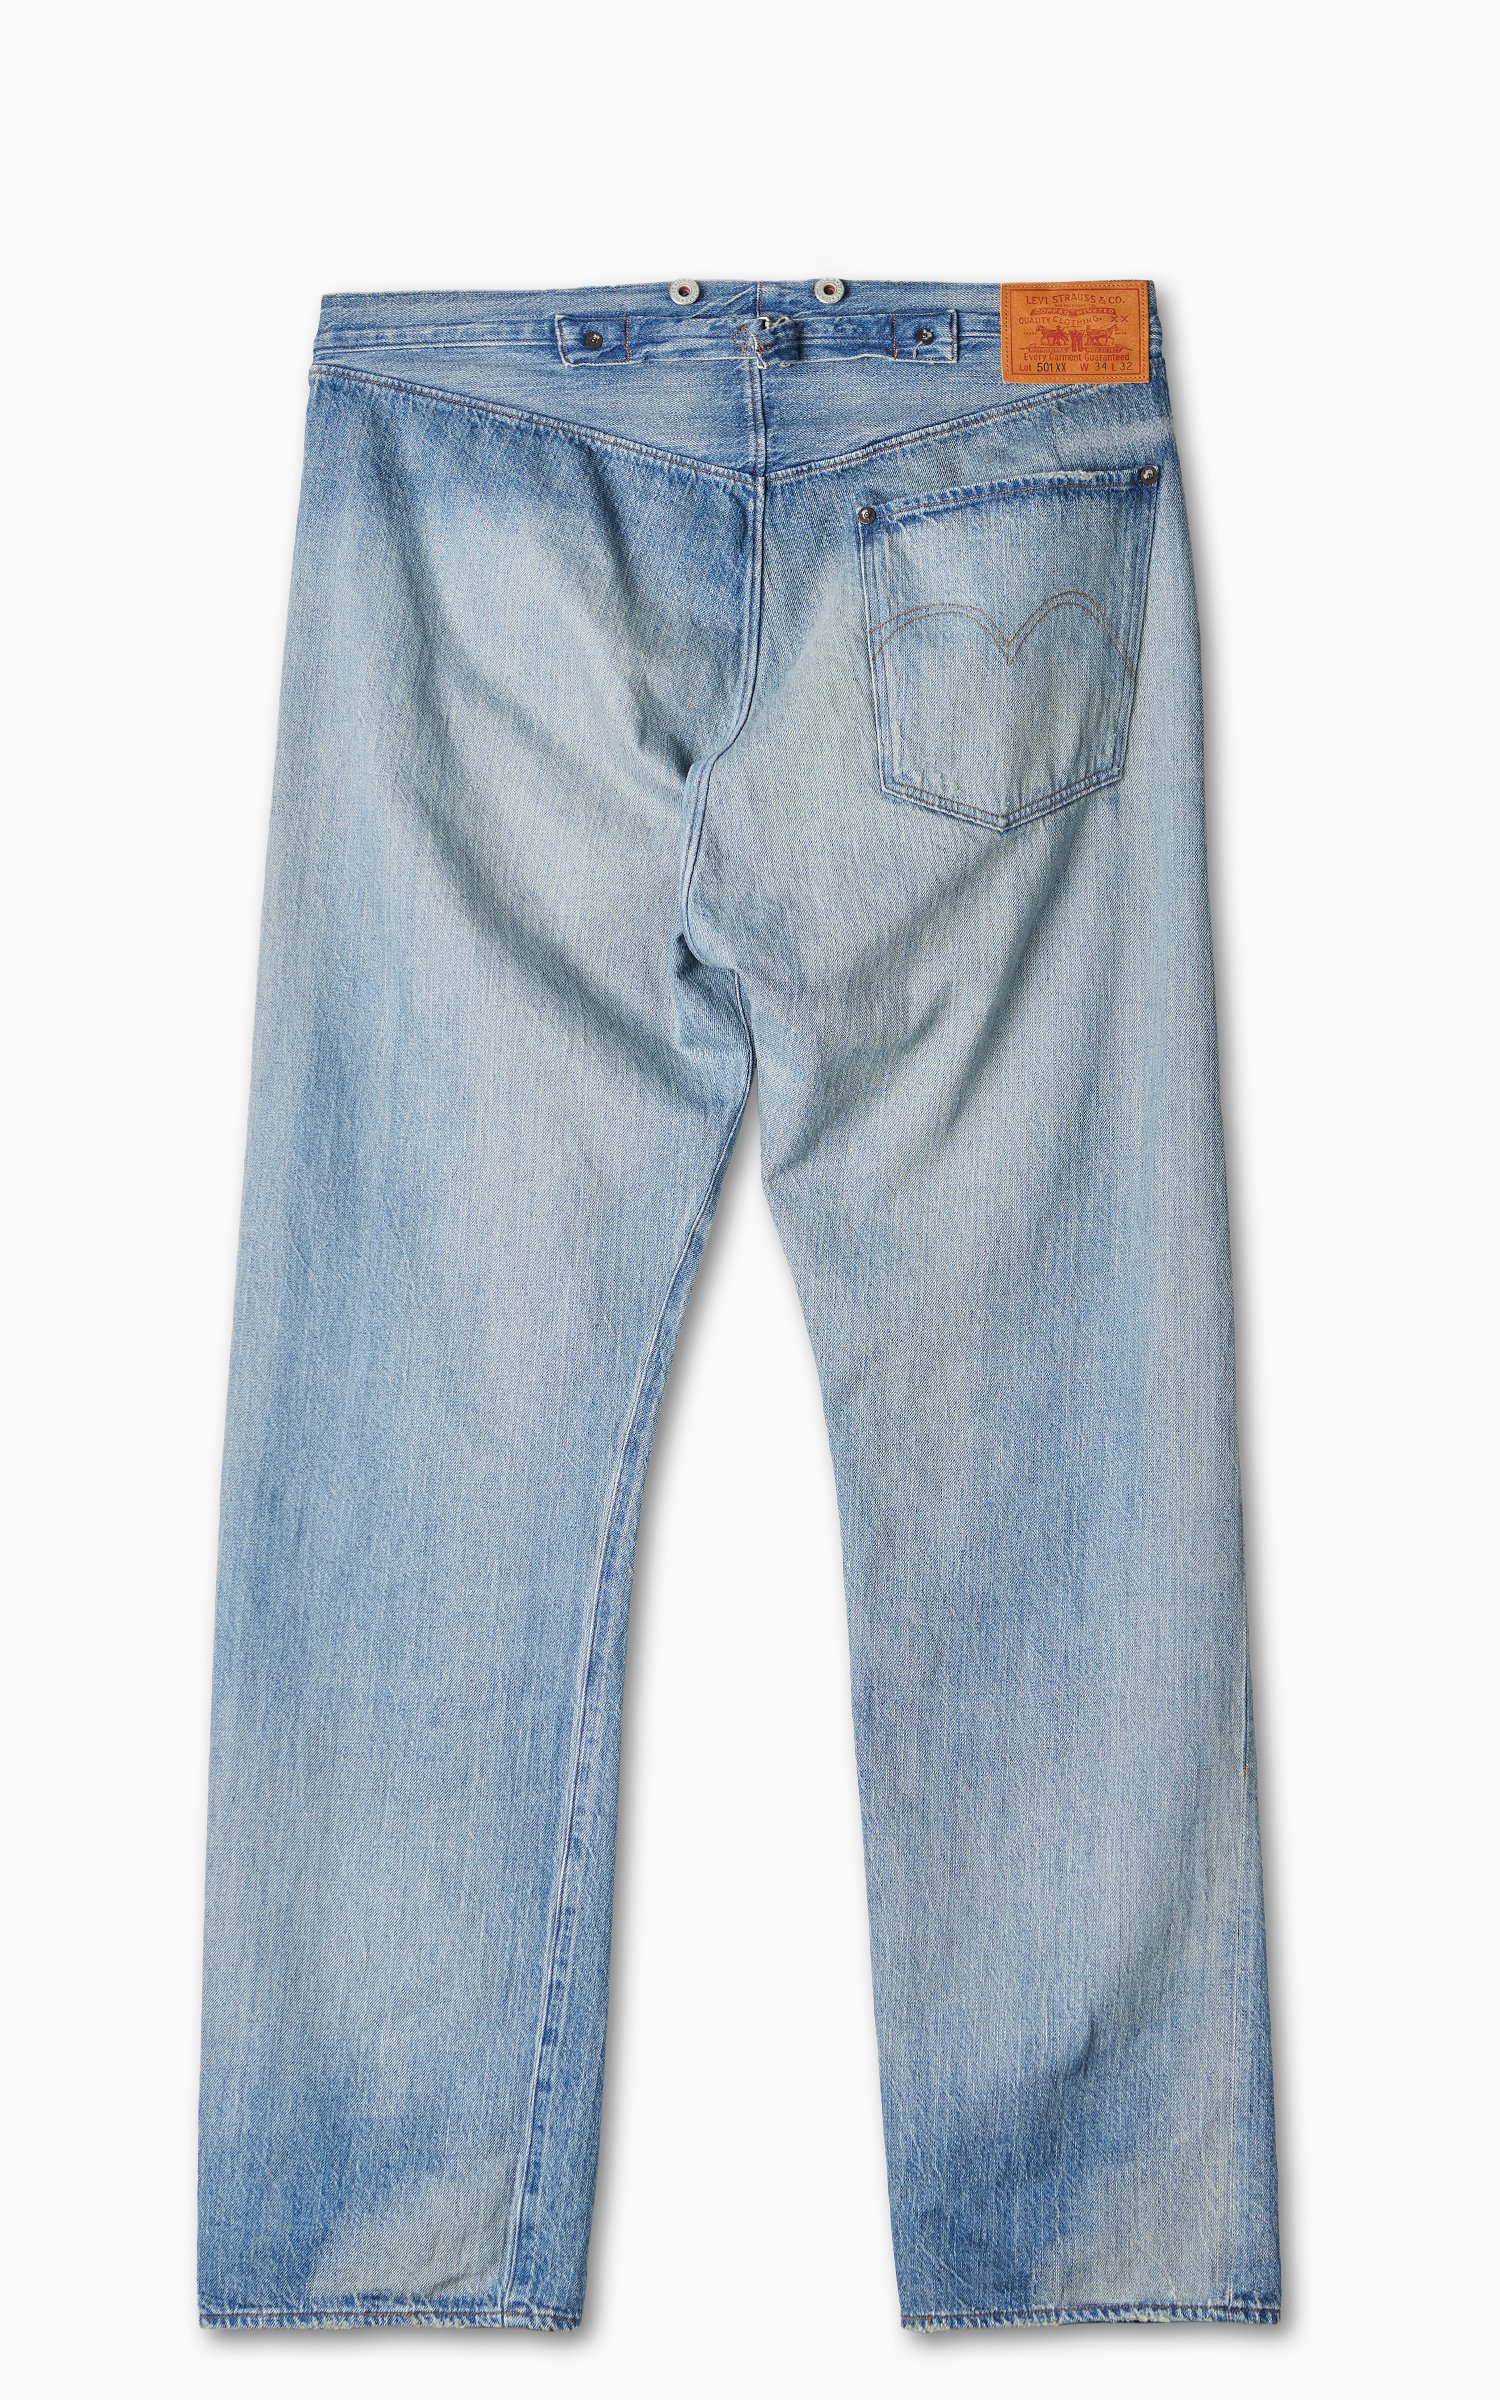 Levi's® Vintage Clothing 1890 XX501® Jeans Twin Peaks Indigo Worn In |  Cultizm